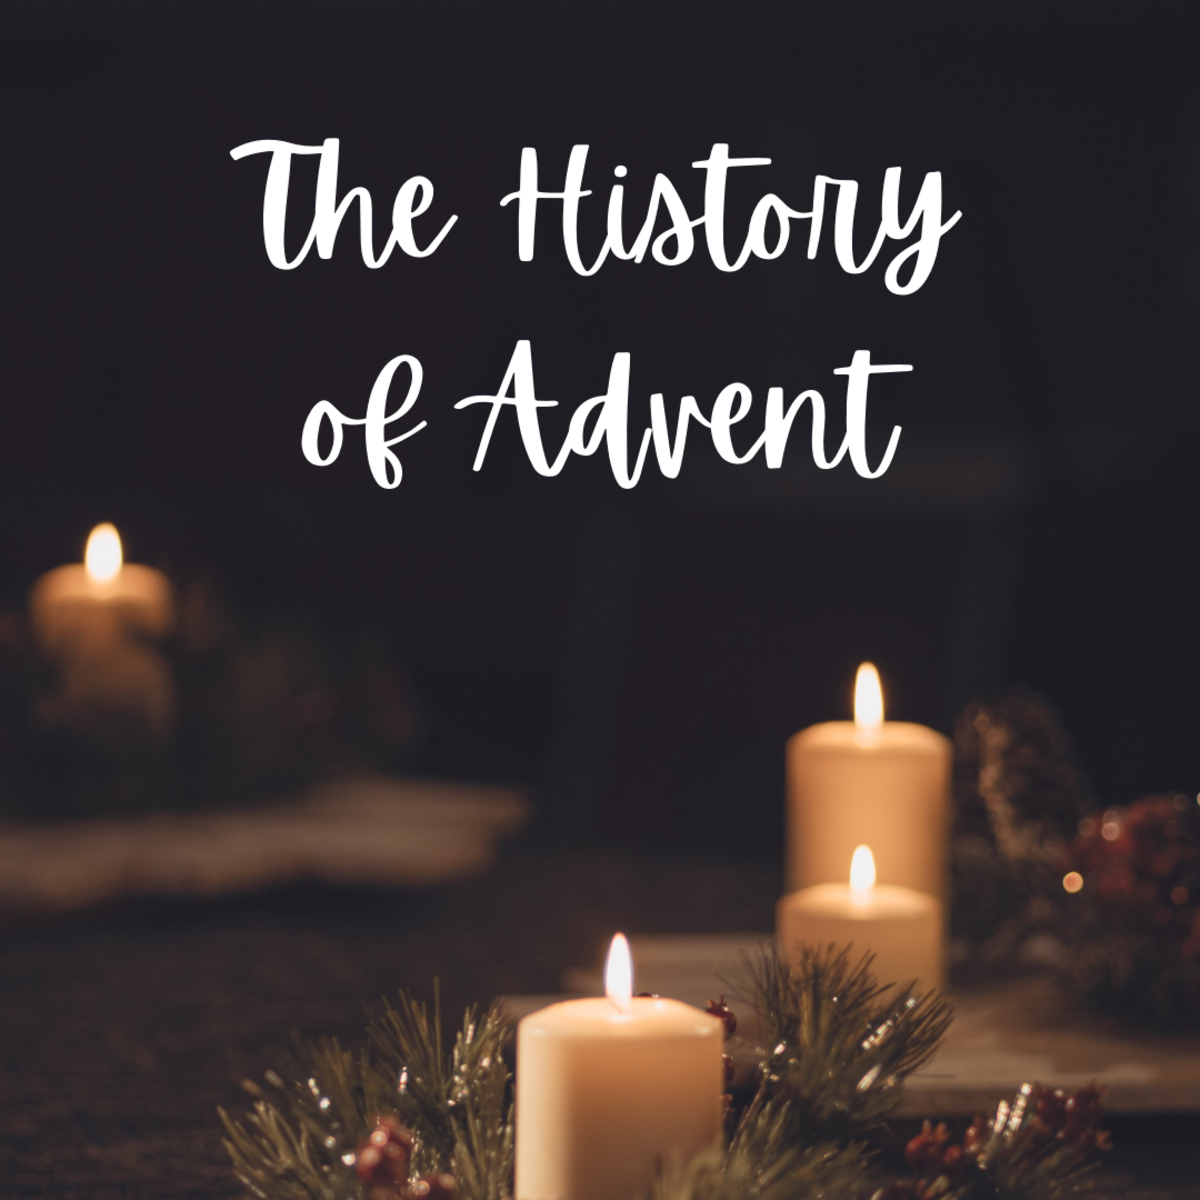 Read on to learn about the history and origins of Advent, its symbolic meaning, as well as the origins and meaning of the Advent wreath.